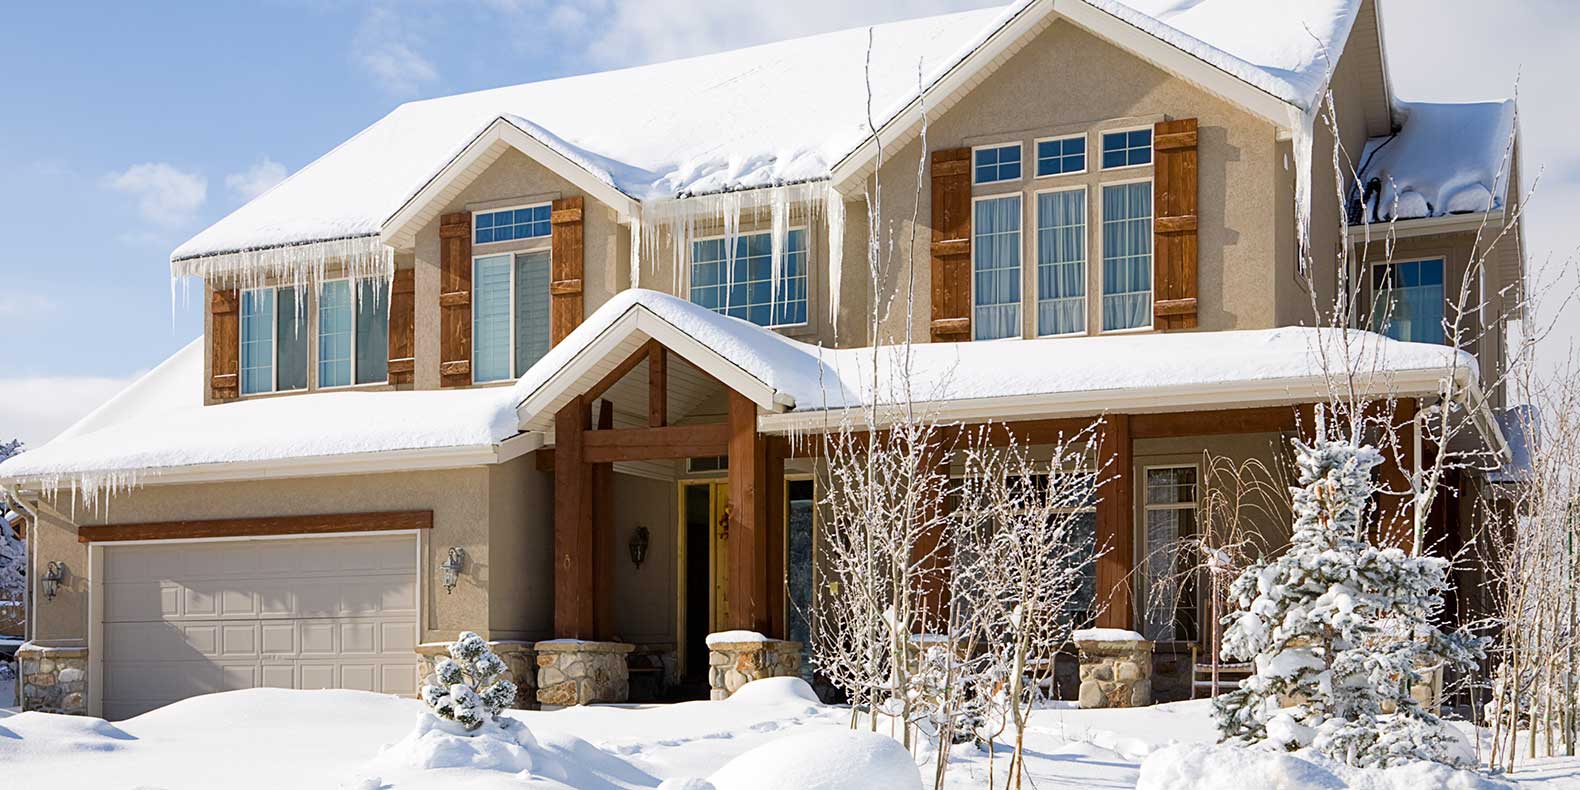 8 Ways to Winterize Your Home